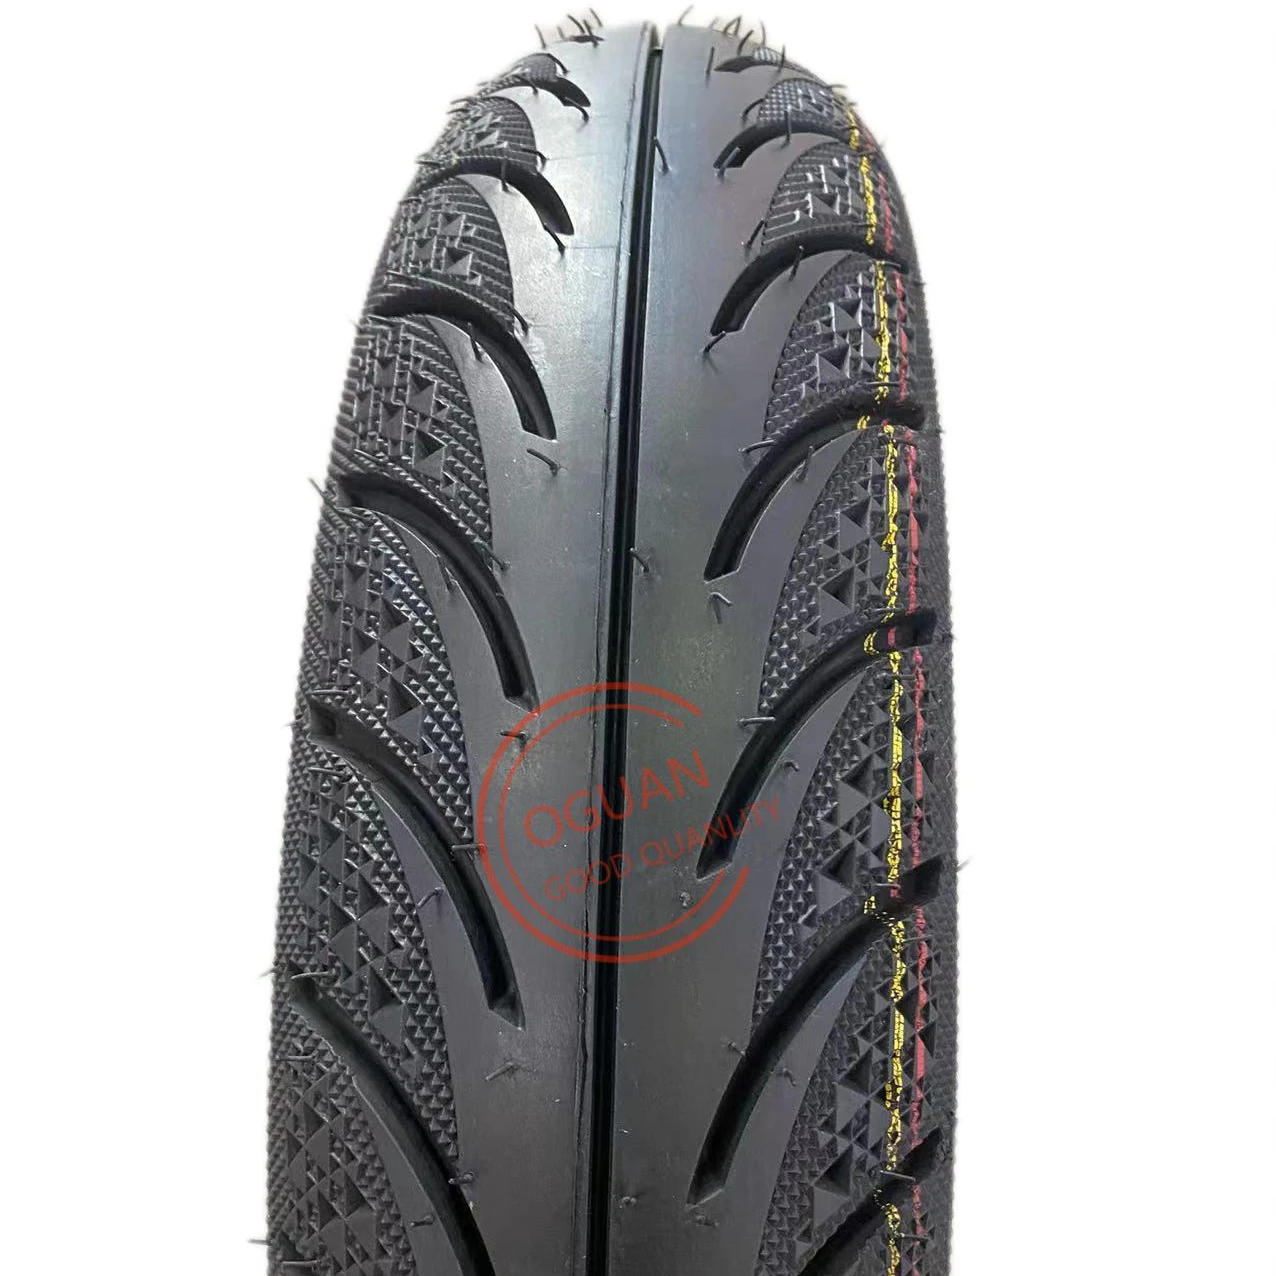 GOOD quality with cheap price Motorcycle Tubeless tyre 110/90 16 120/80 18 130/60 13 120/70 12